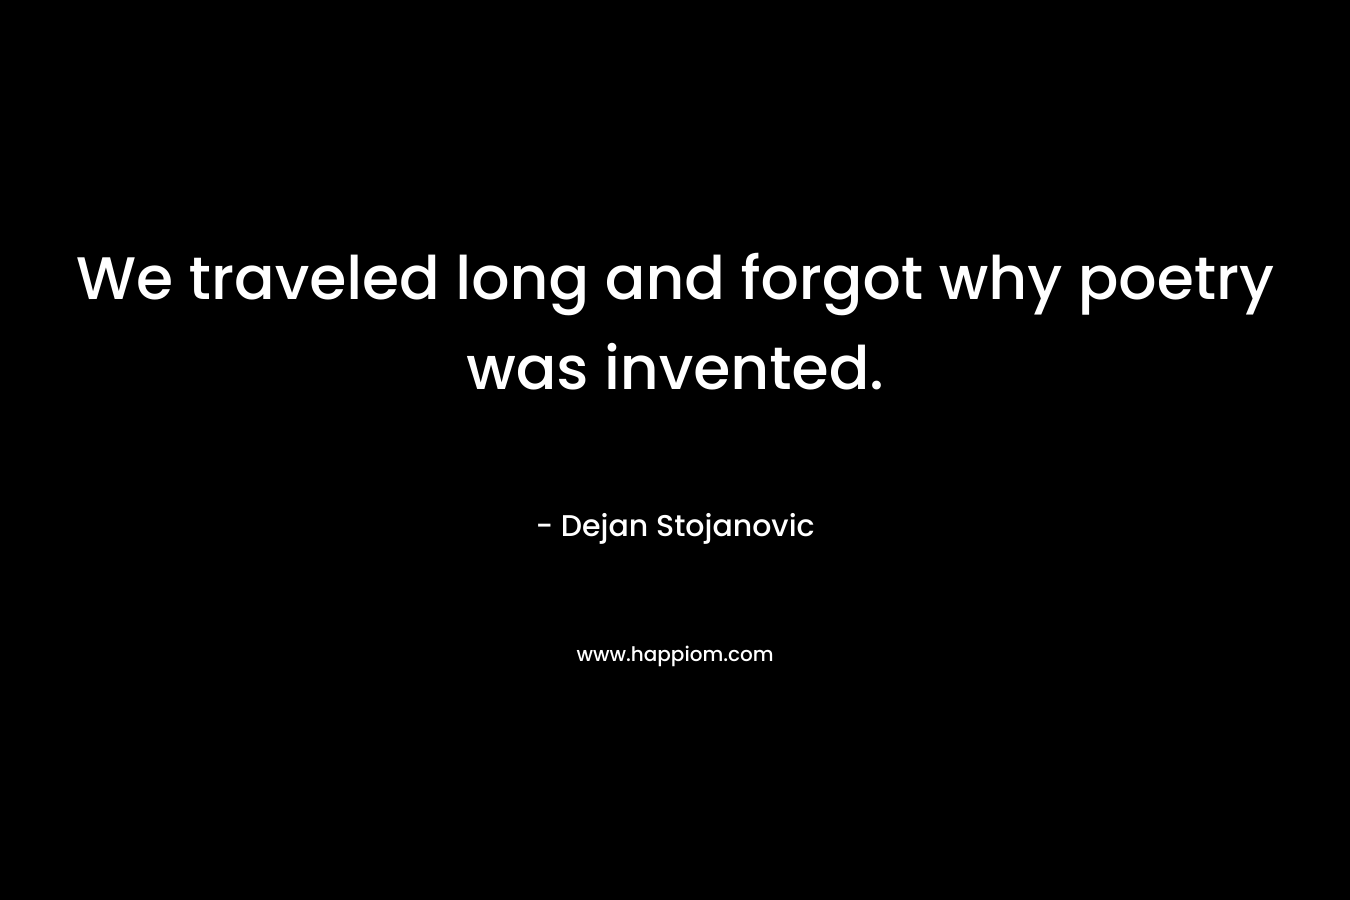 We traveled long and forgot why poetry was invented. – Dejan Stojanovic